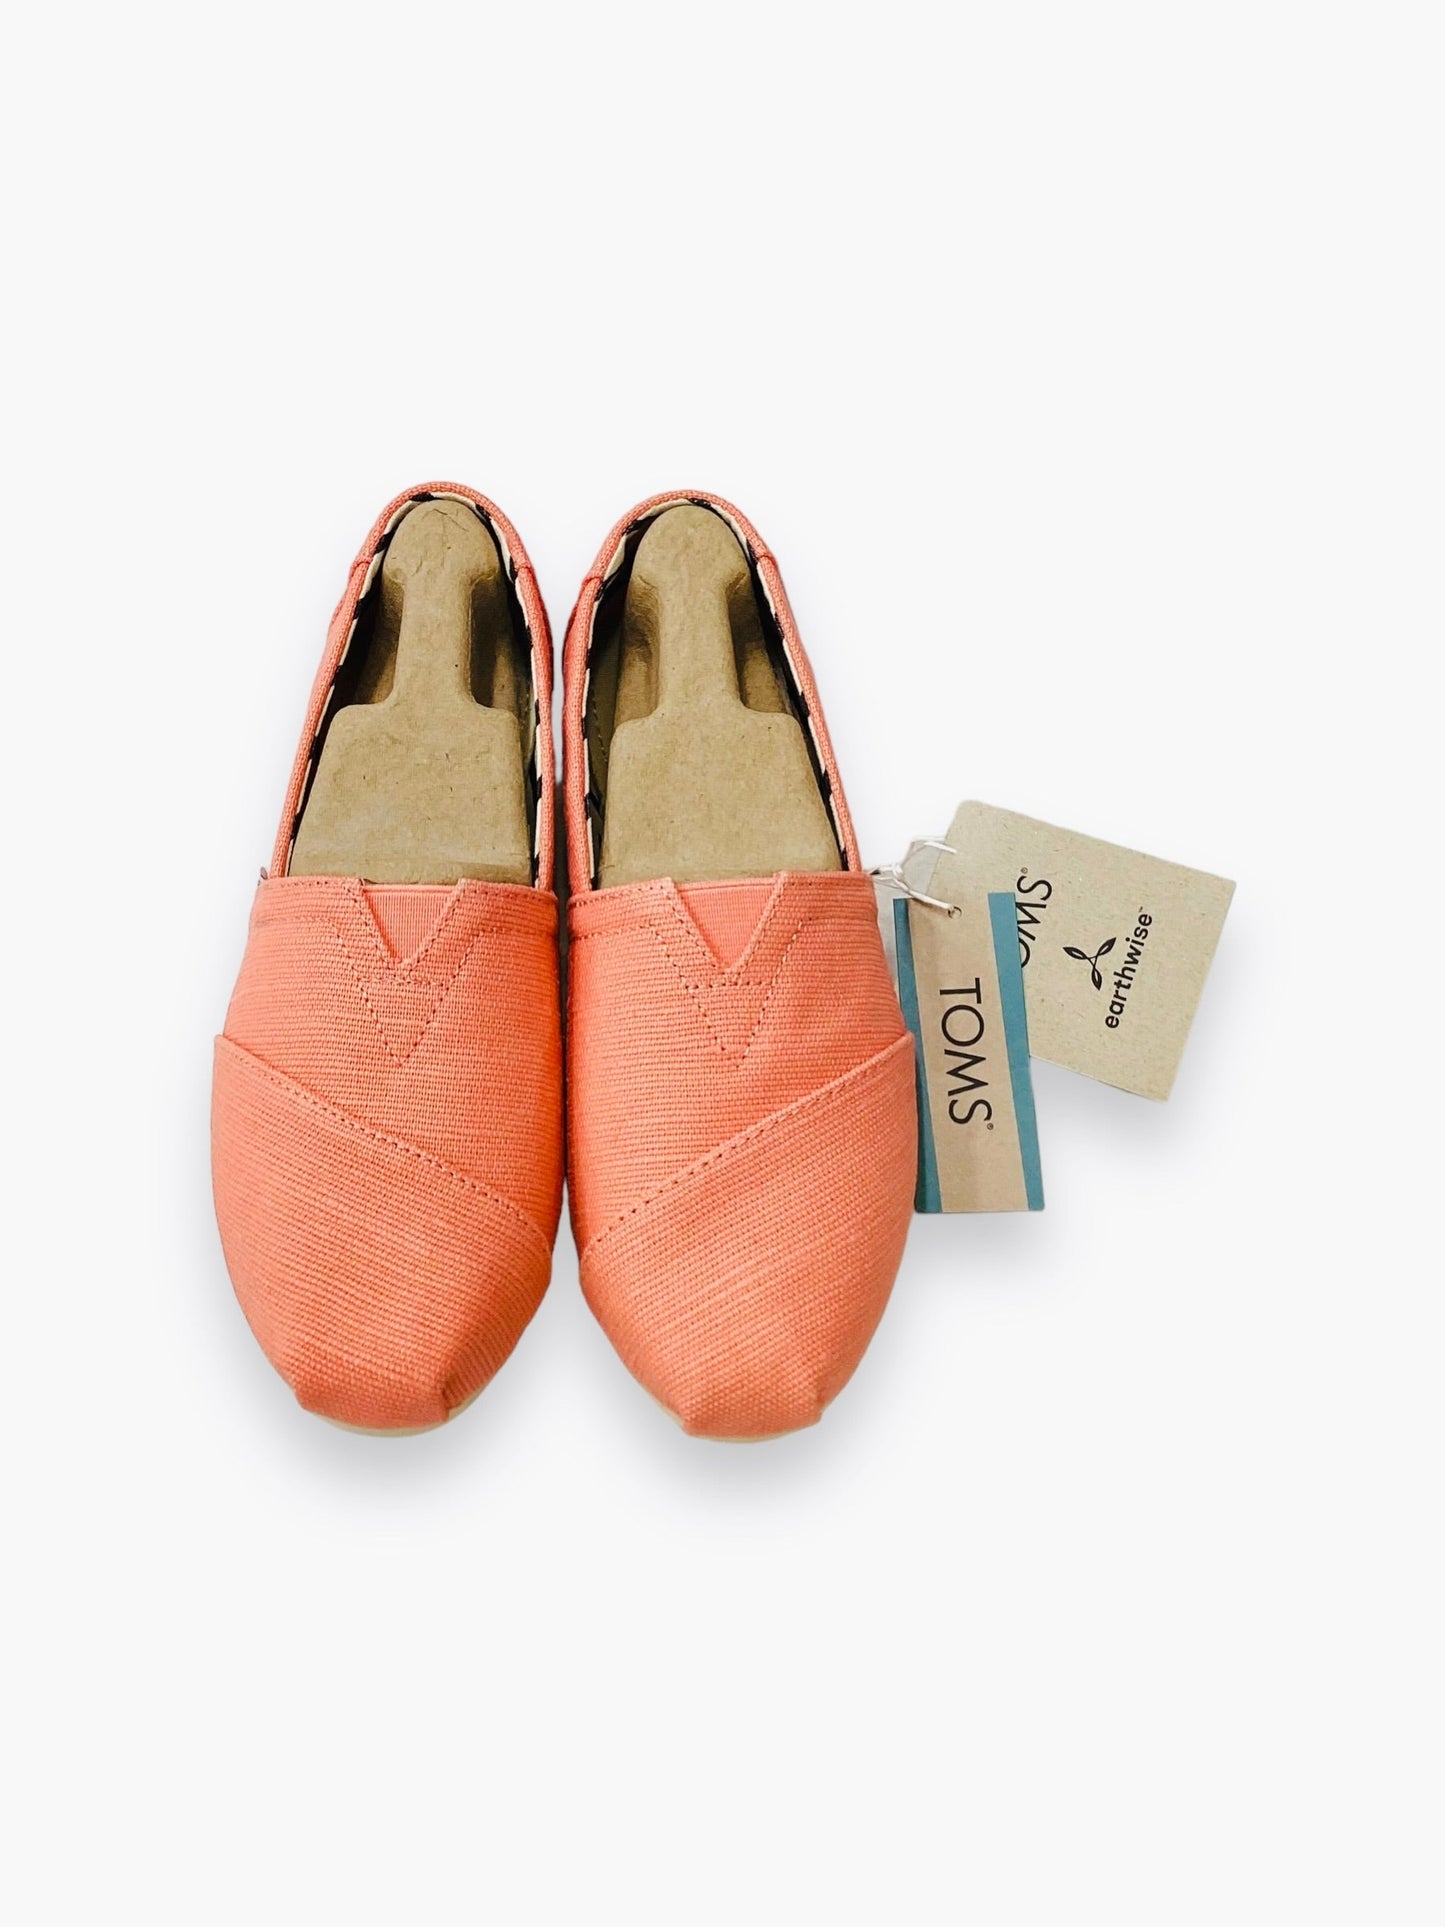 NWT Coral Shoes Flats Toms, Size 6